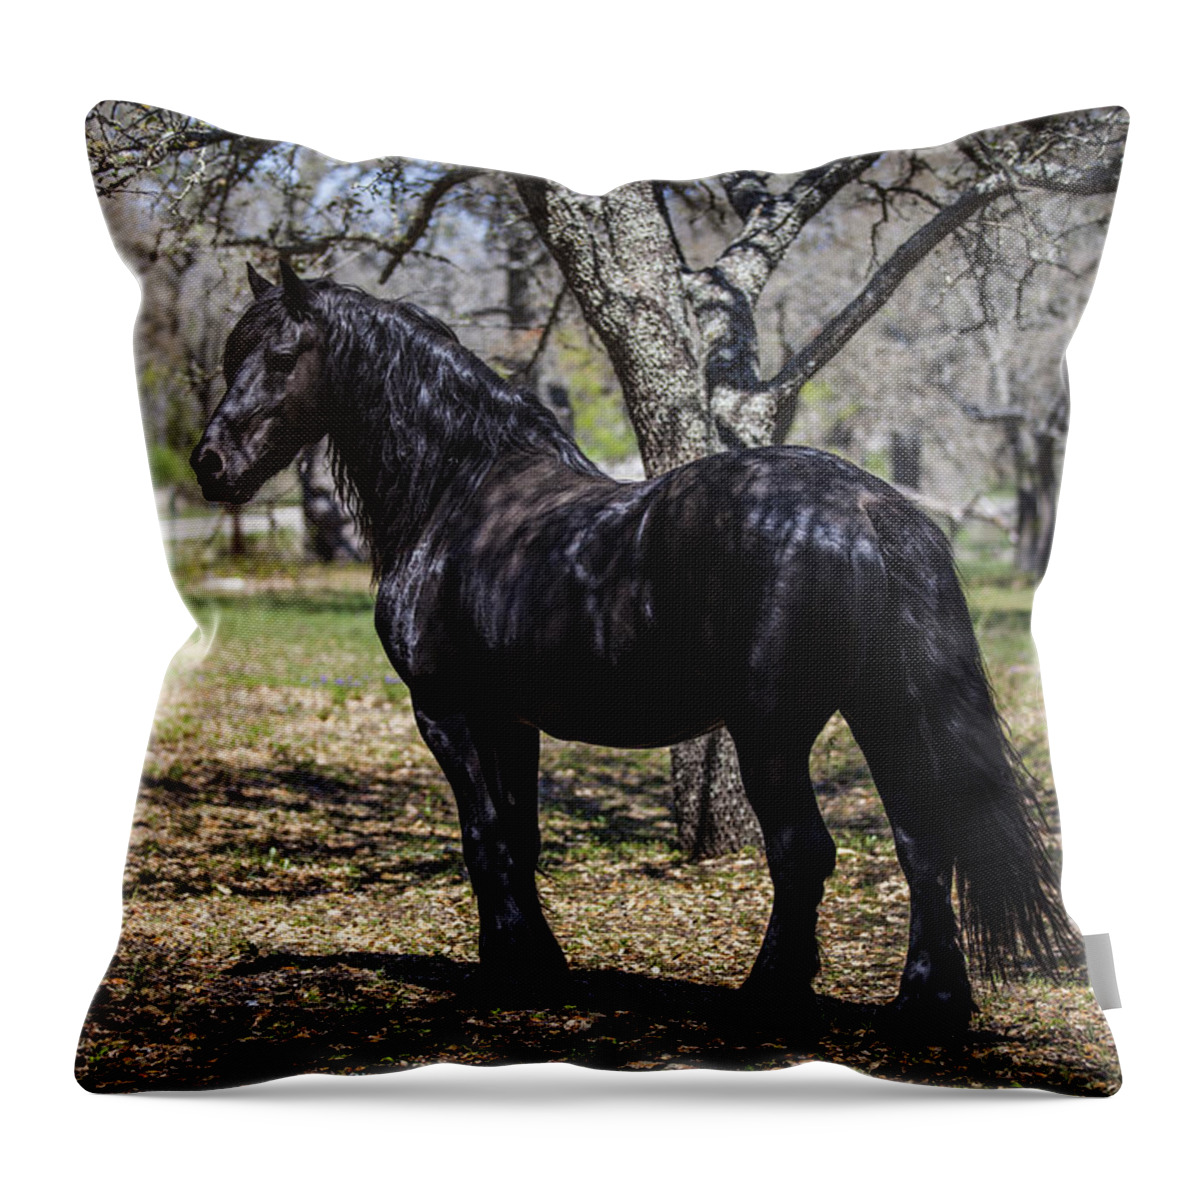 Horses Throw Pillow featuring the photograph The Friesian Stallion Eros by Amber Kresge